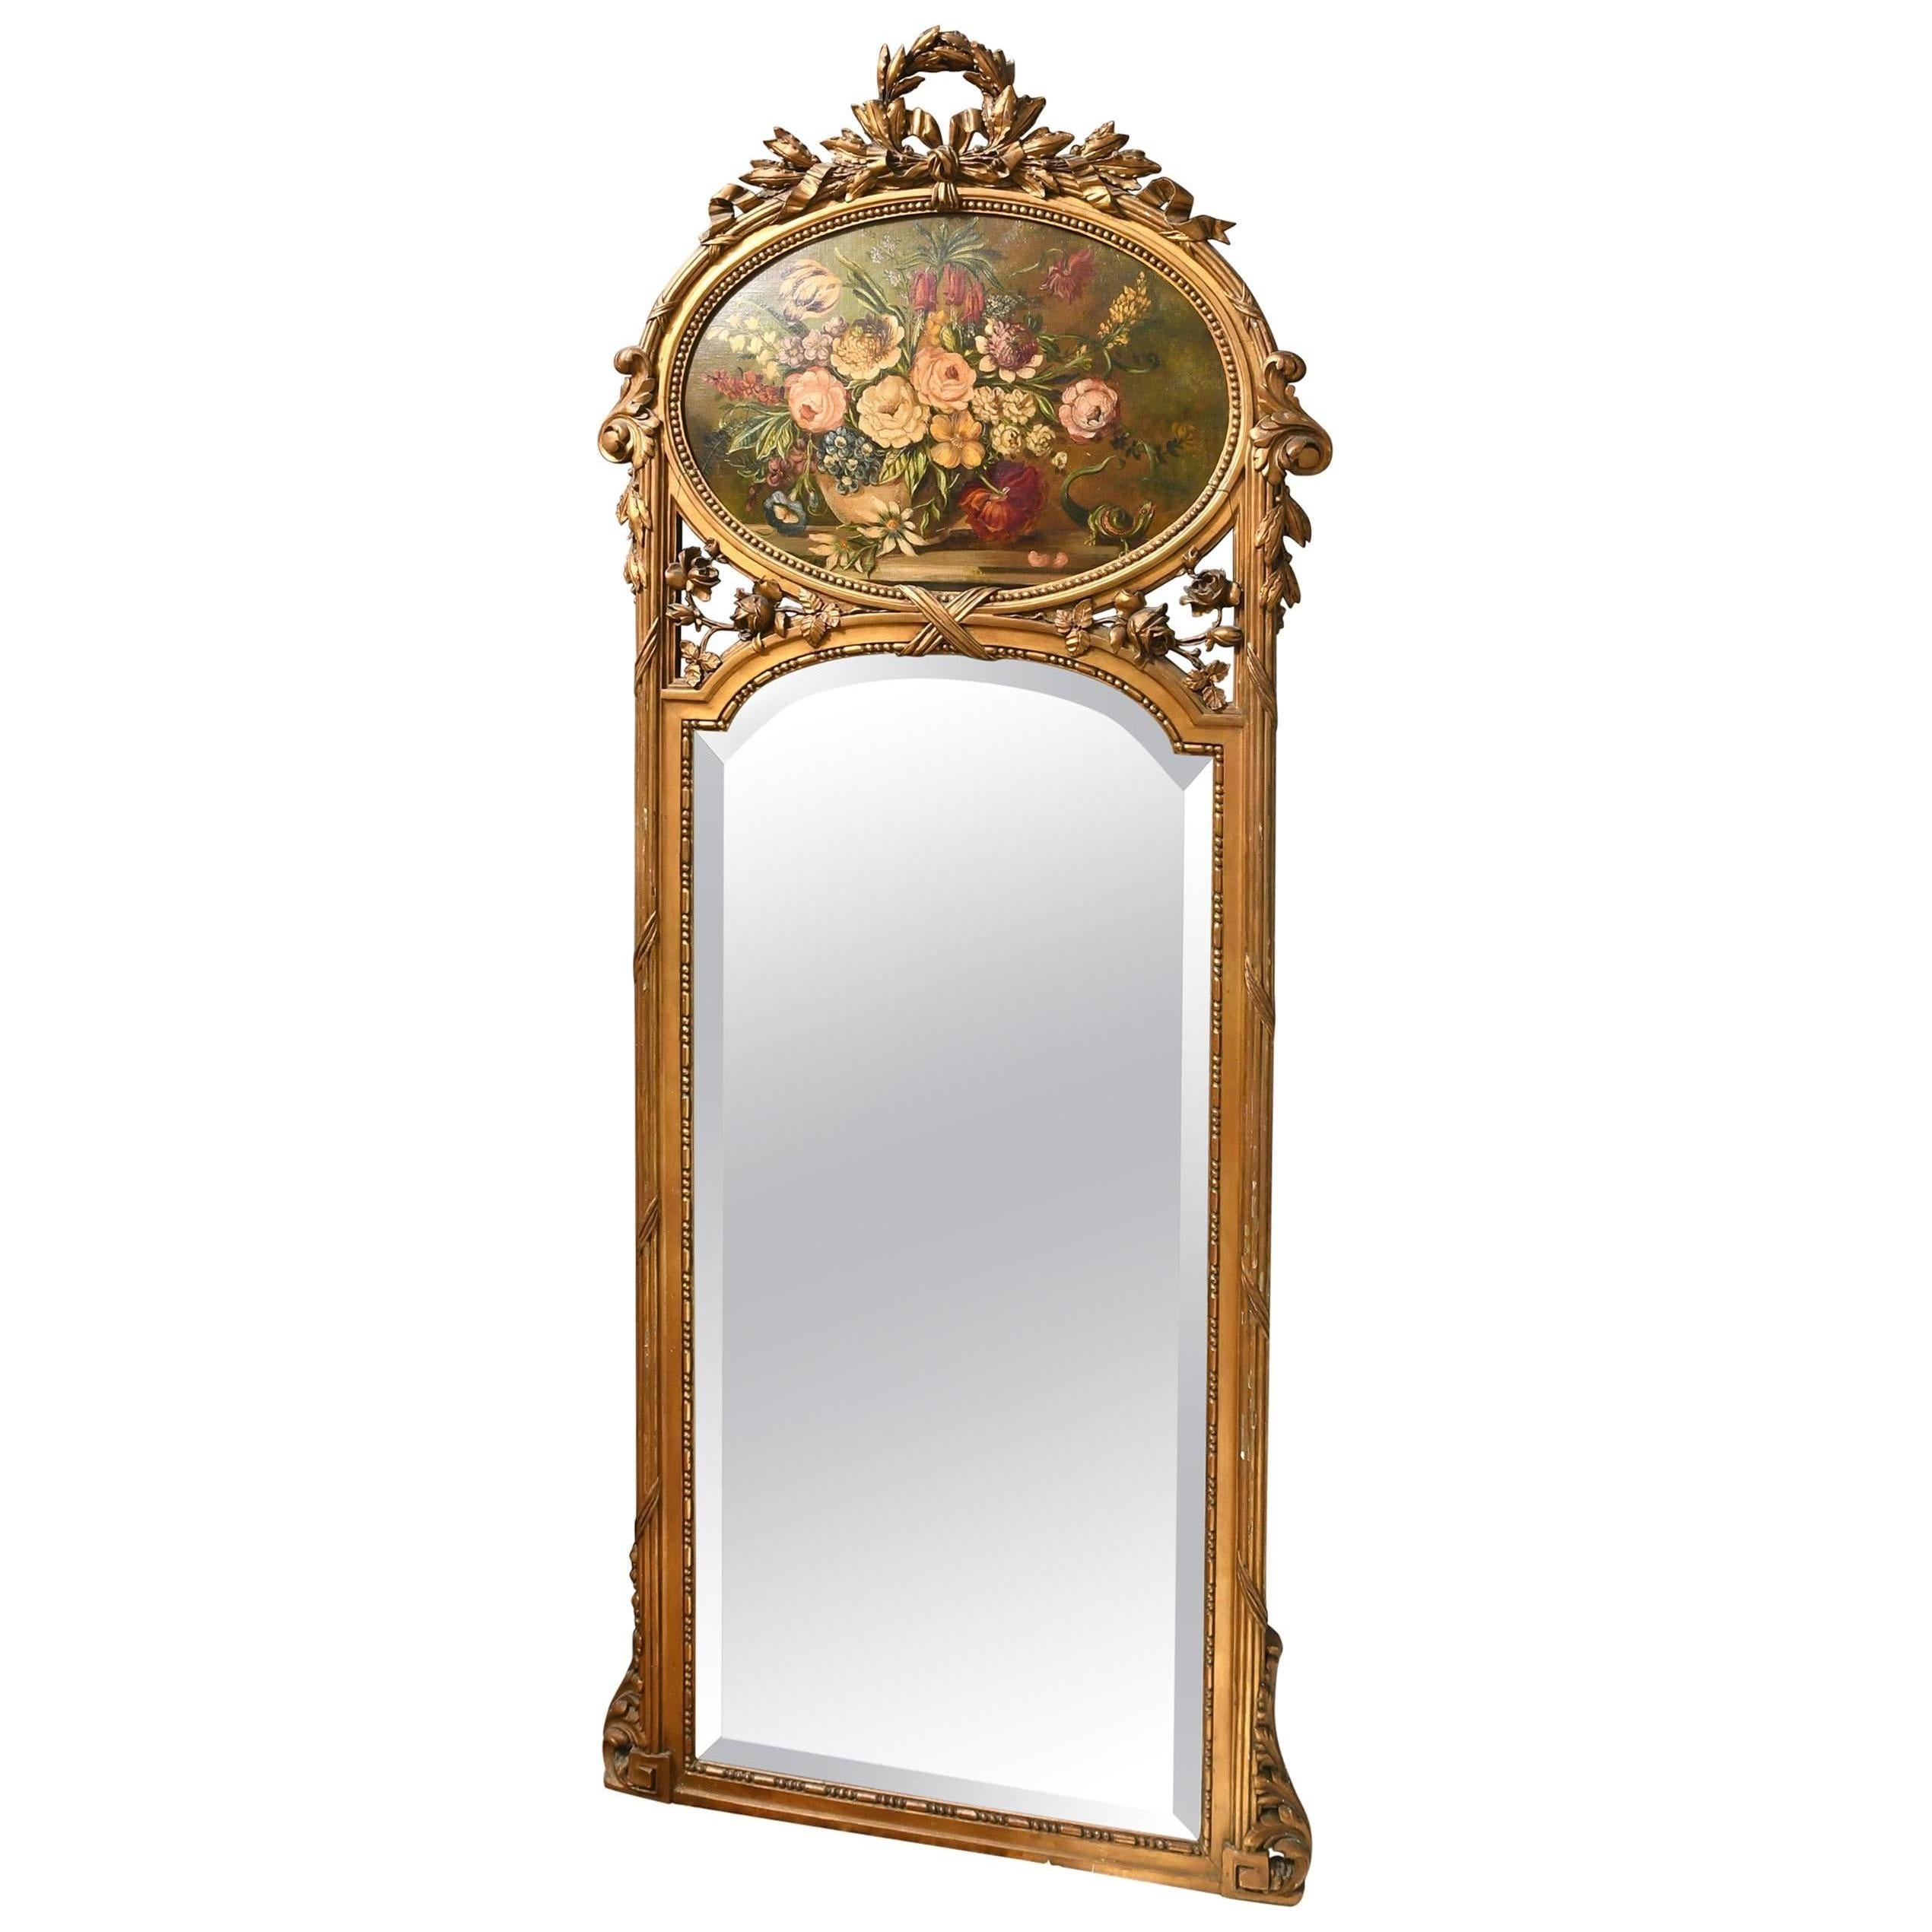 Neoclassical Style Wall Mirror with Oval Painting in the Top